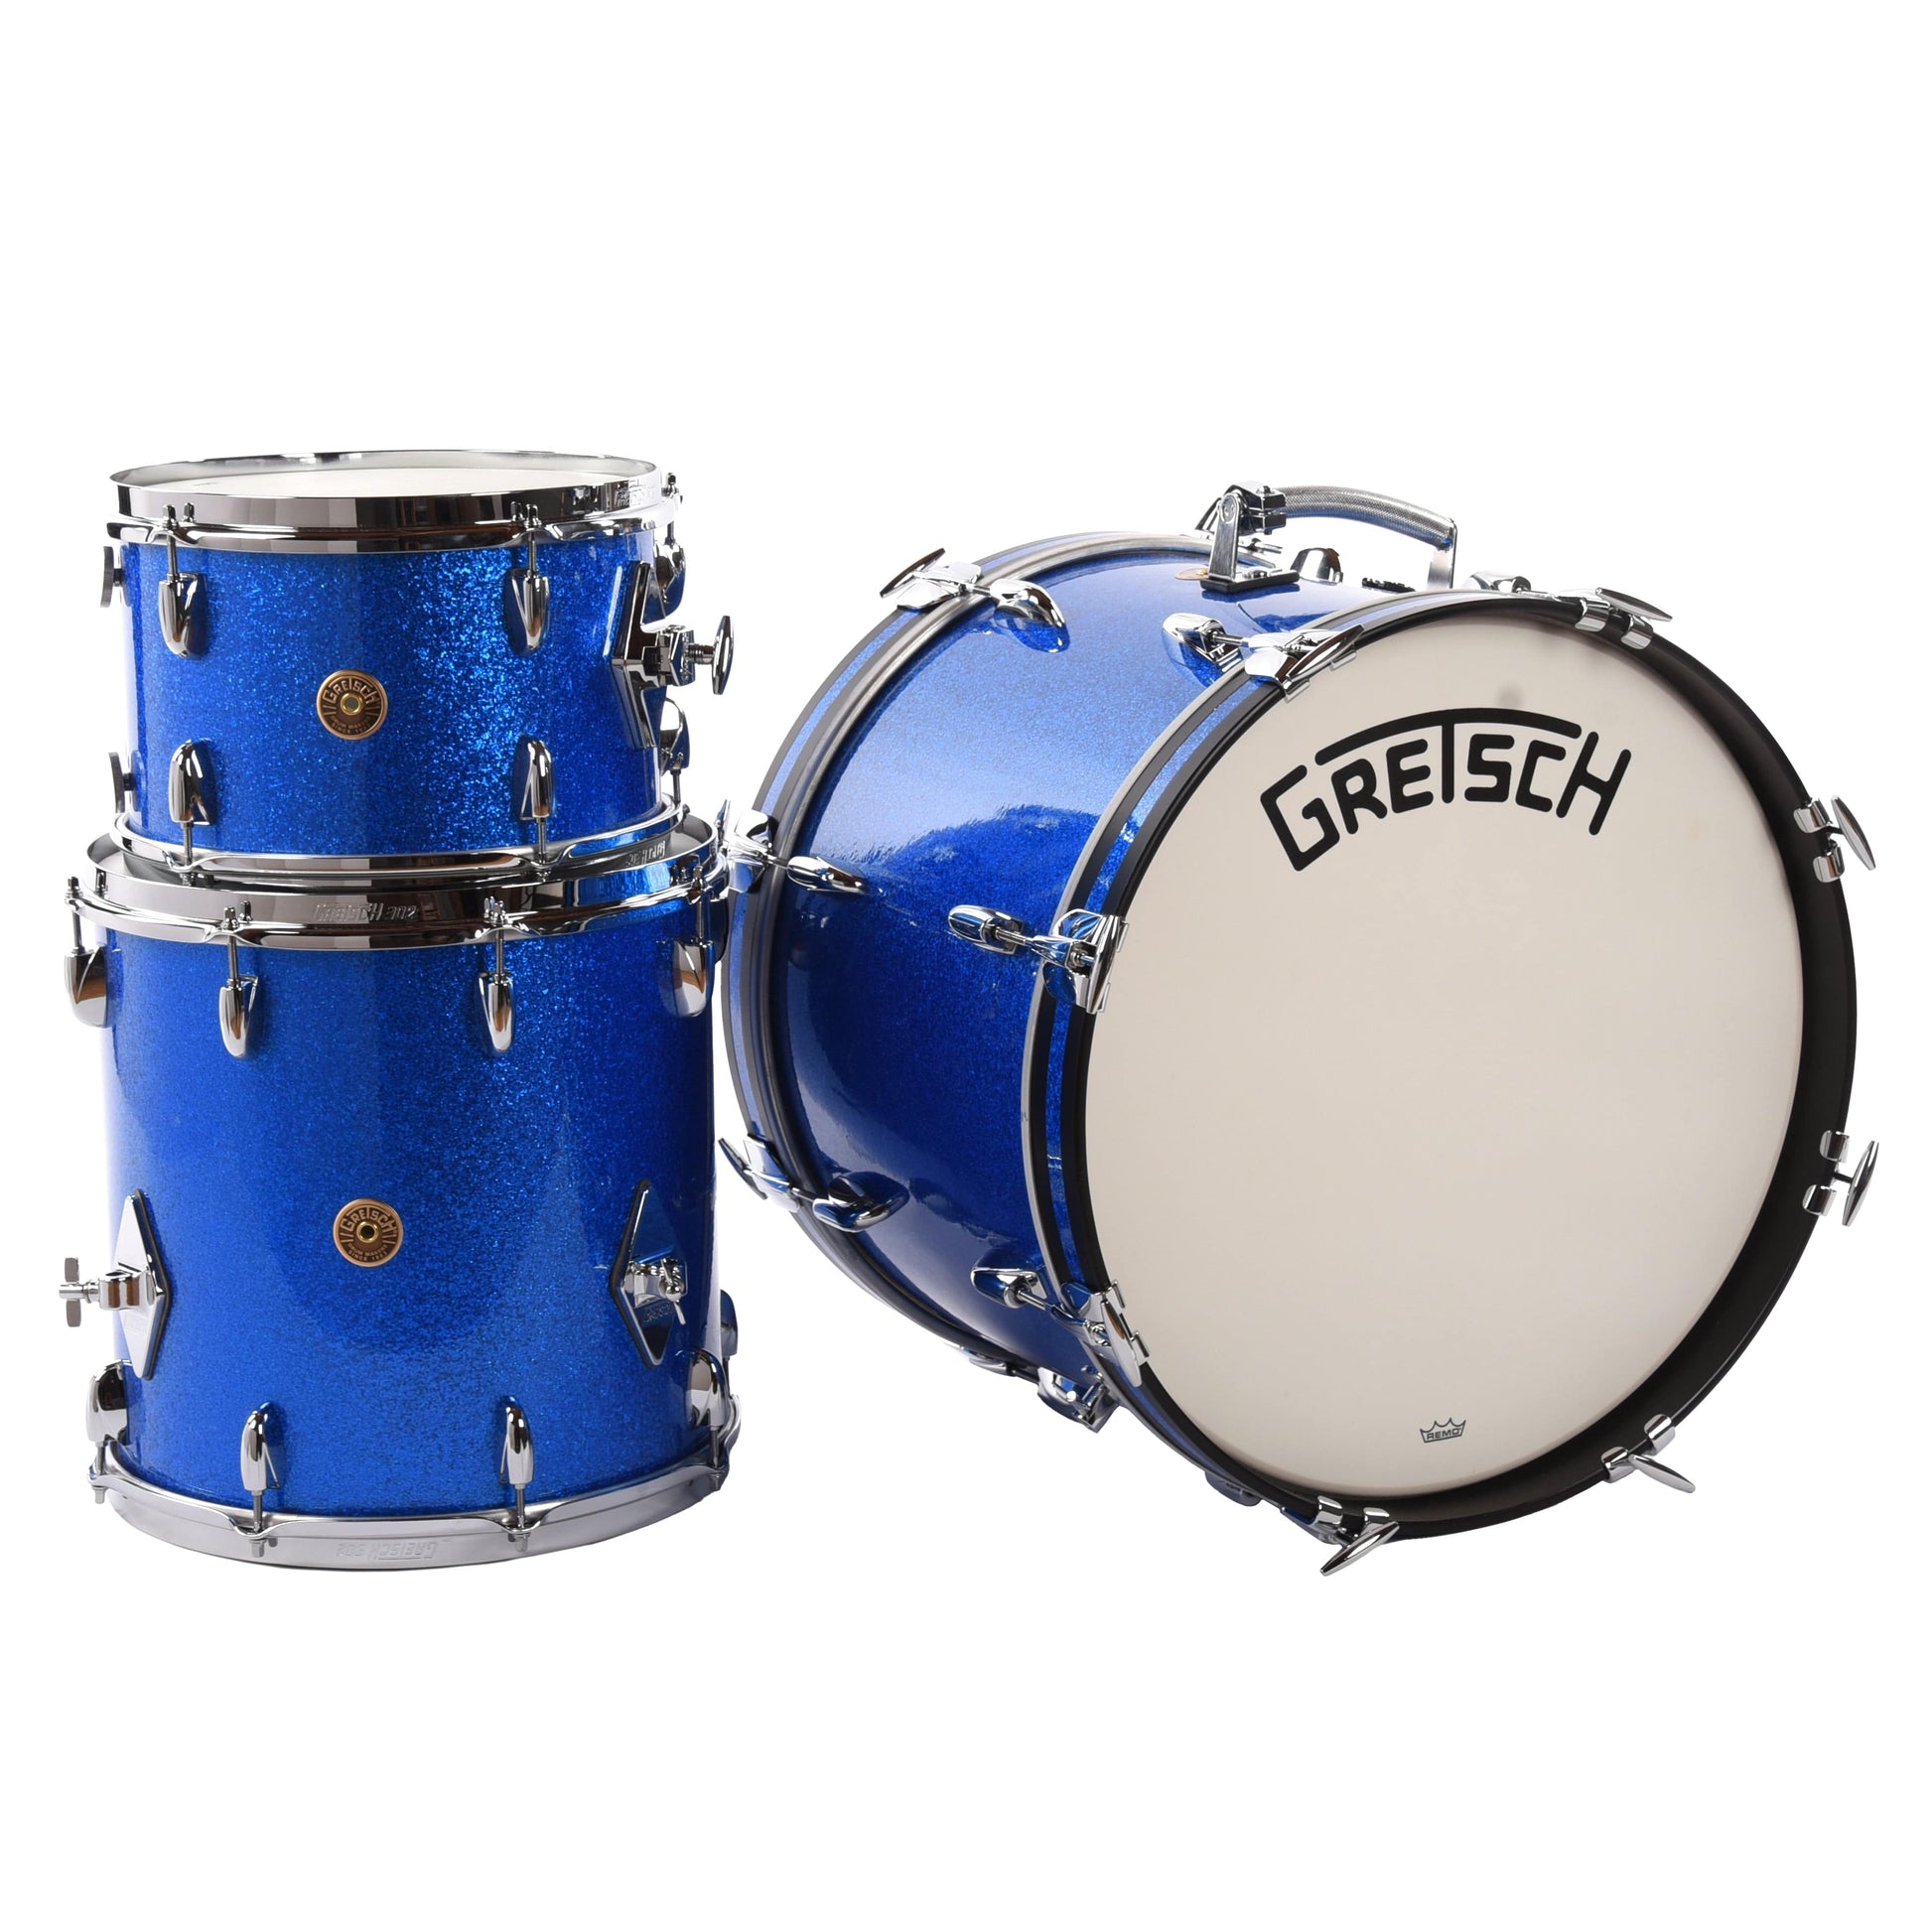 Gretsch Broadkaster 12/14/20 3pc. Drum Kit Blue Sparkle (Vintage Build) Drums and Percussion / Acoustic Drums / Full Acoustic Kits